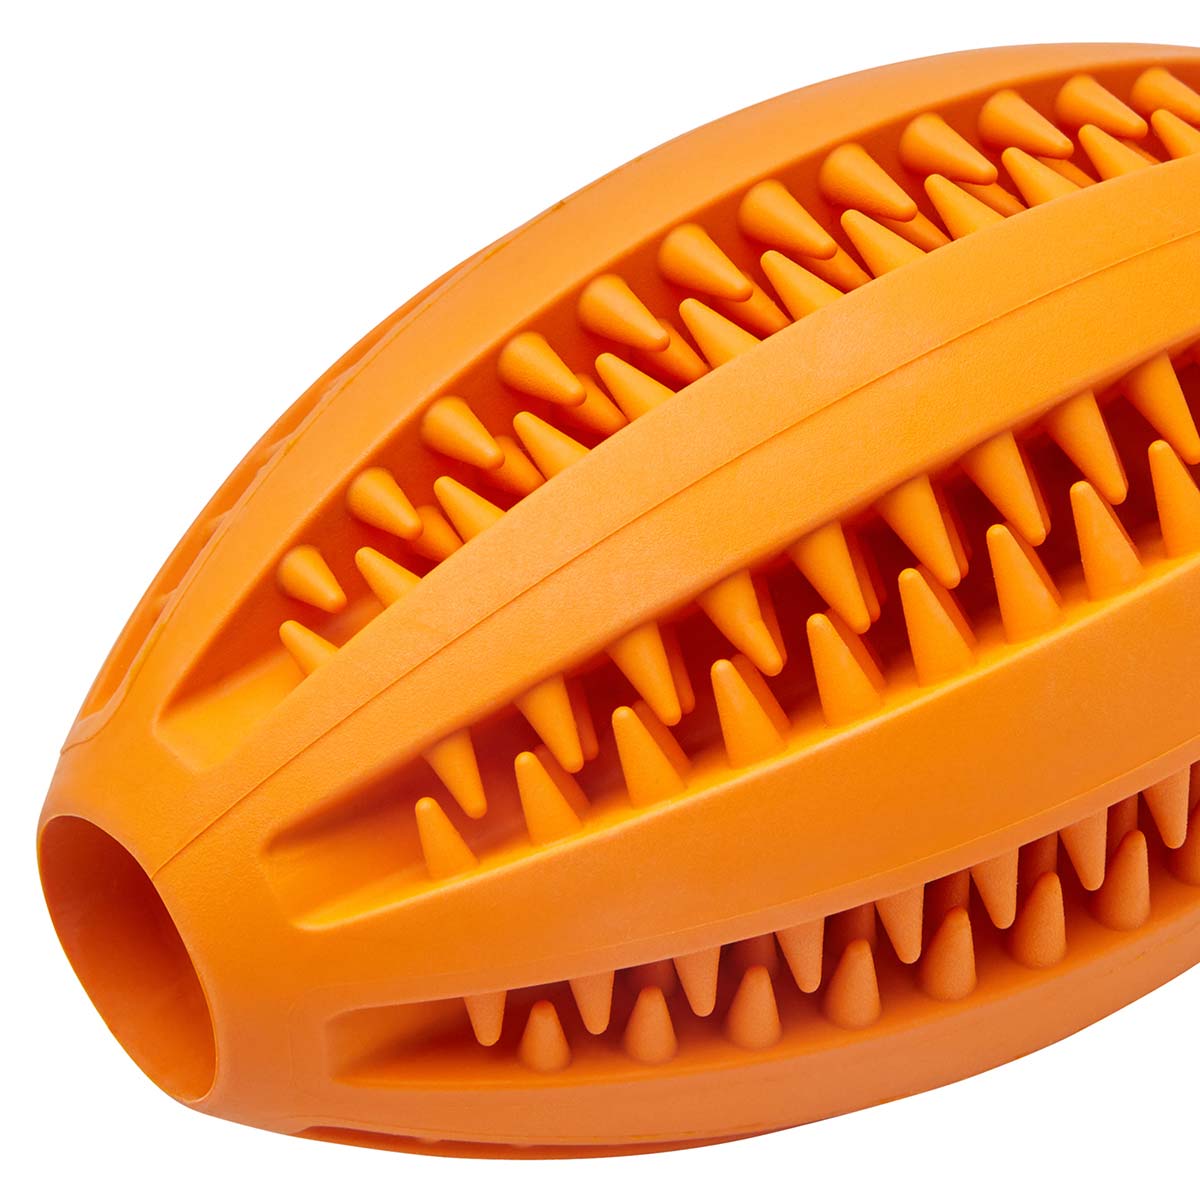 Lexi & Me Rubber Oval Dog Toy